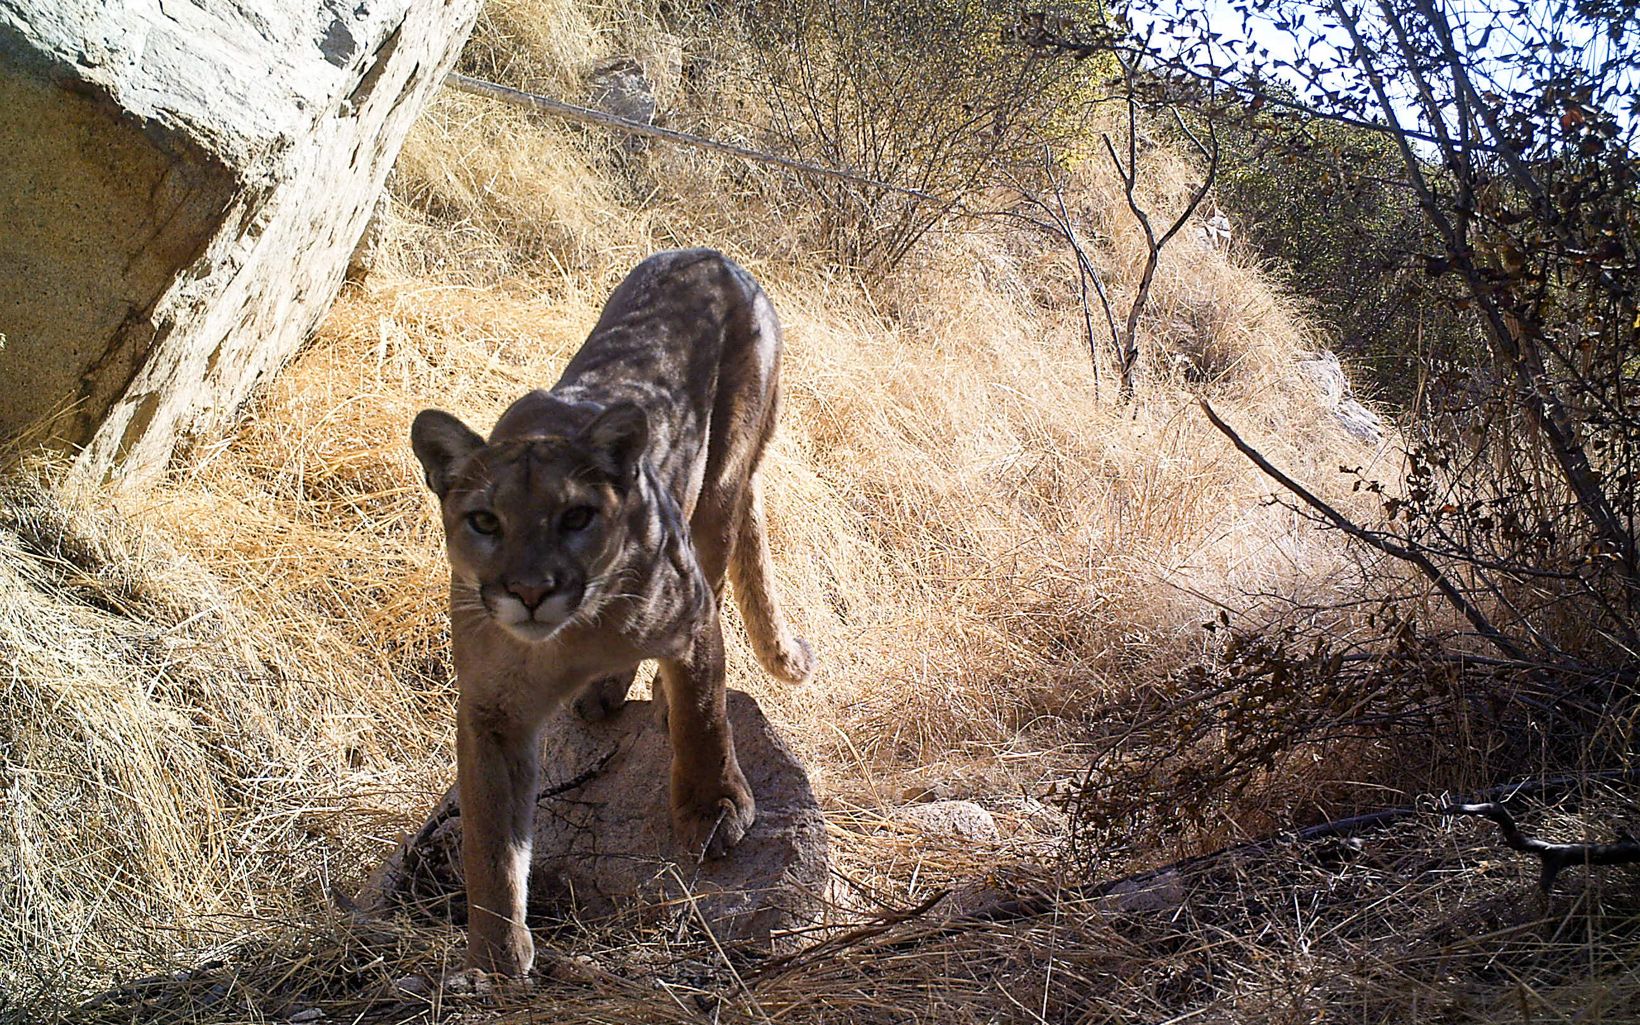 A mountain lion is captured by a camera trap while moving through dried vegetation.